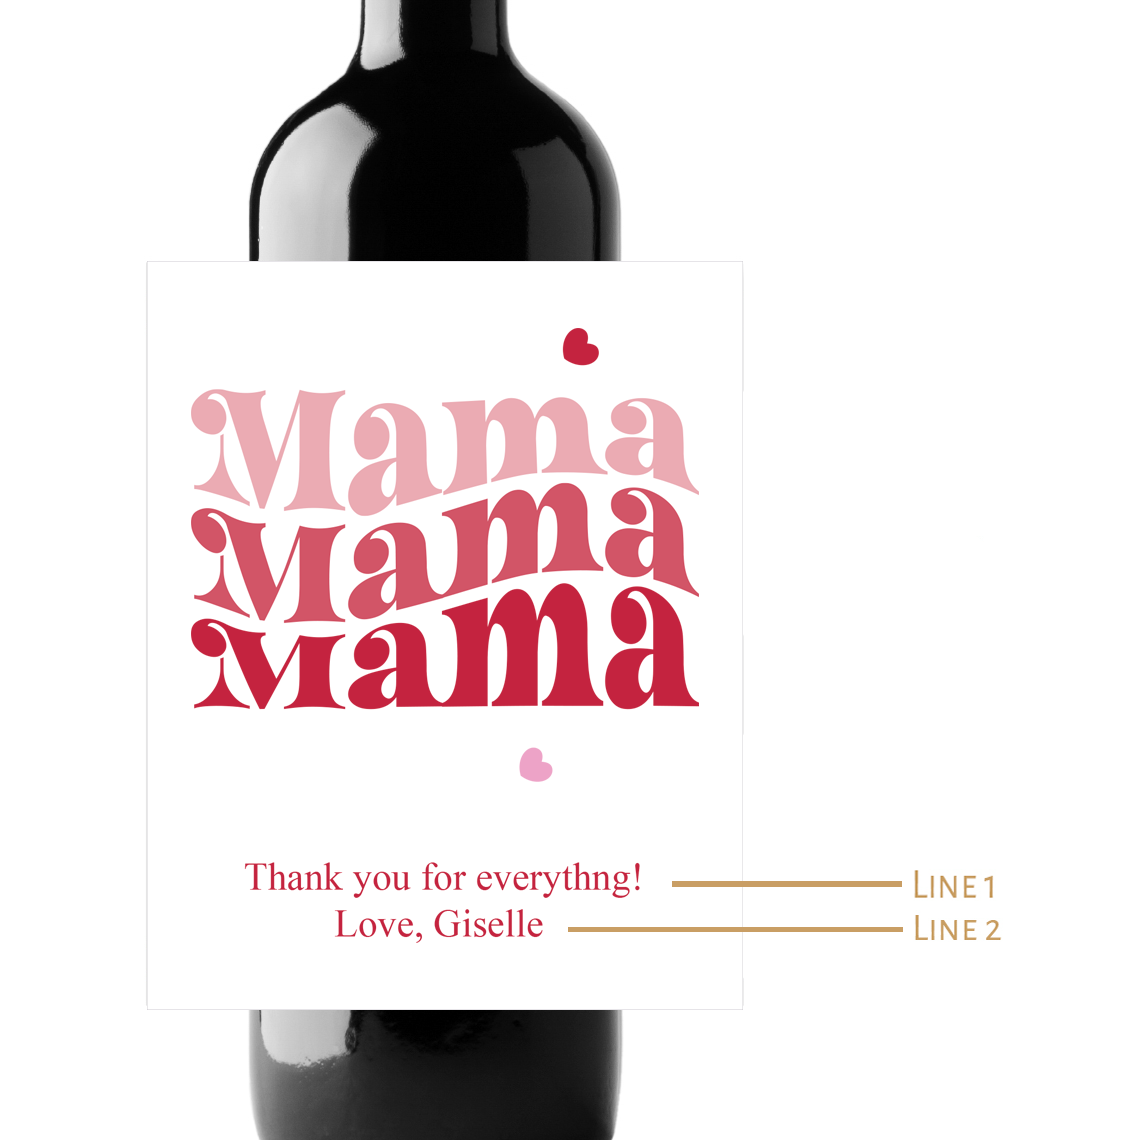 Happy Mother's Day Custom Personalized Wine Champagne Labels (set of 3)